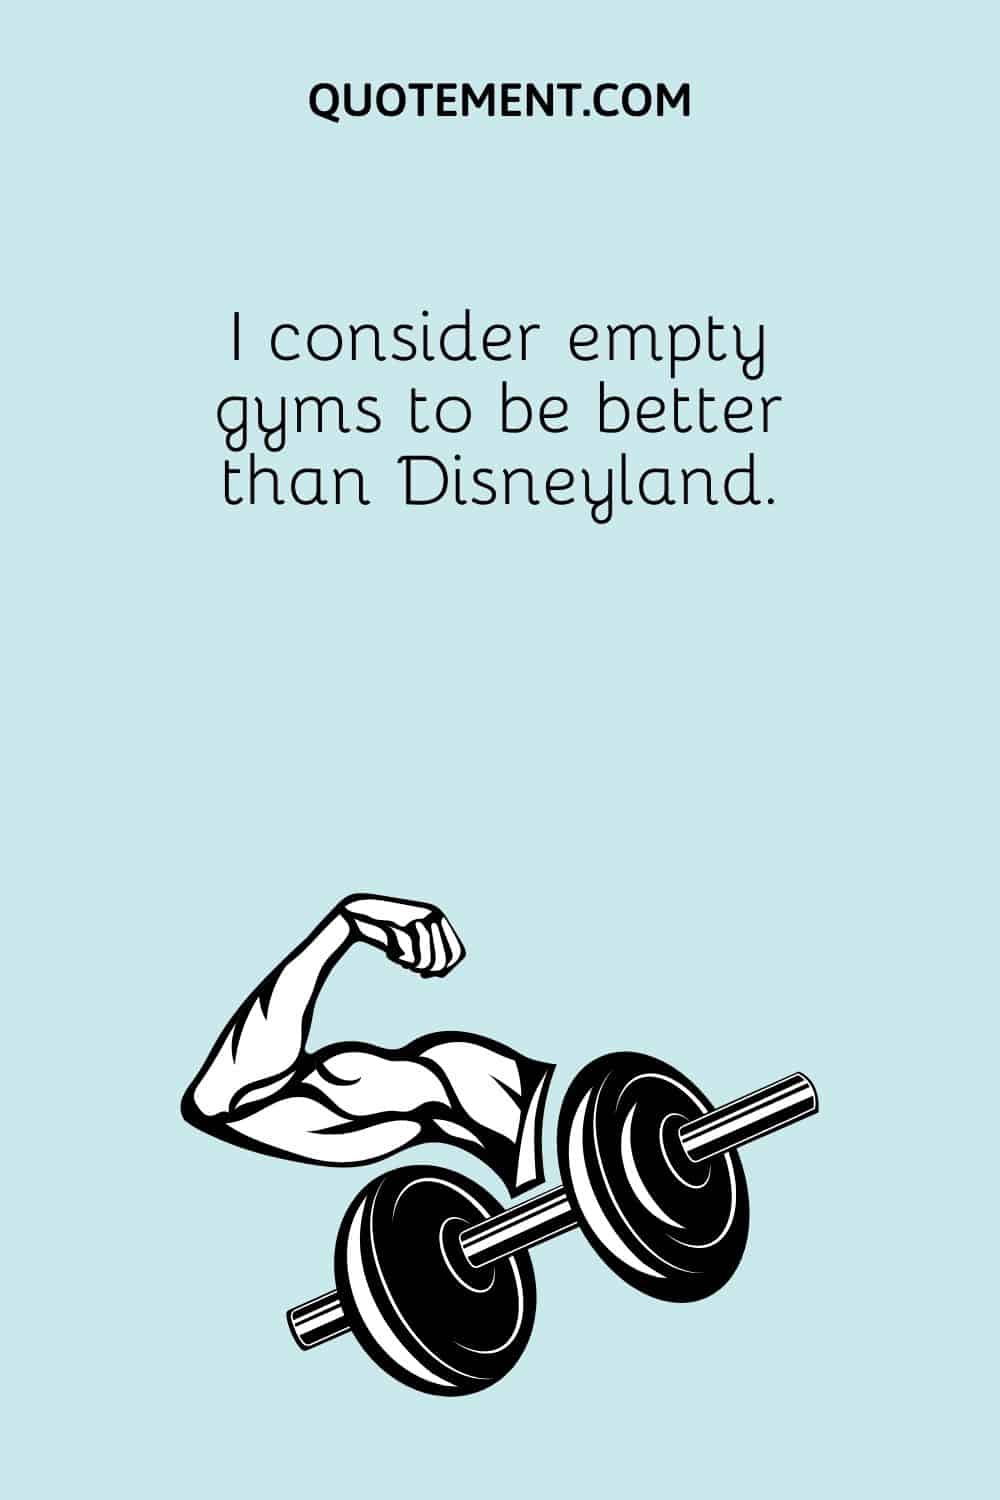 I consider empty gyms to be better than Disneyland.